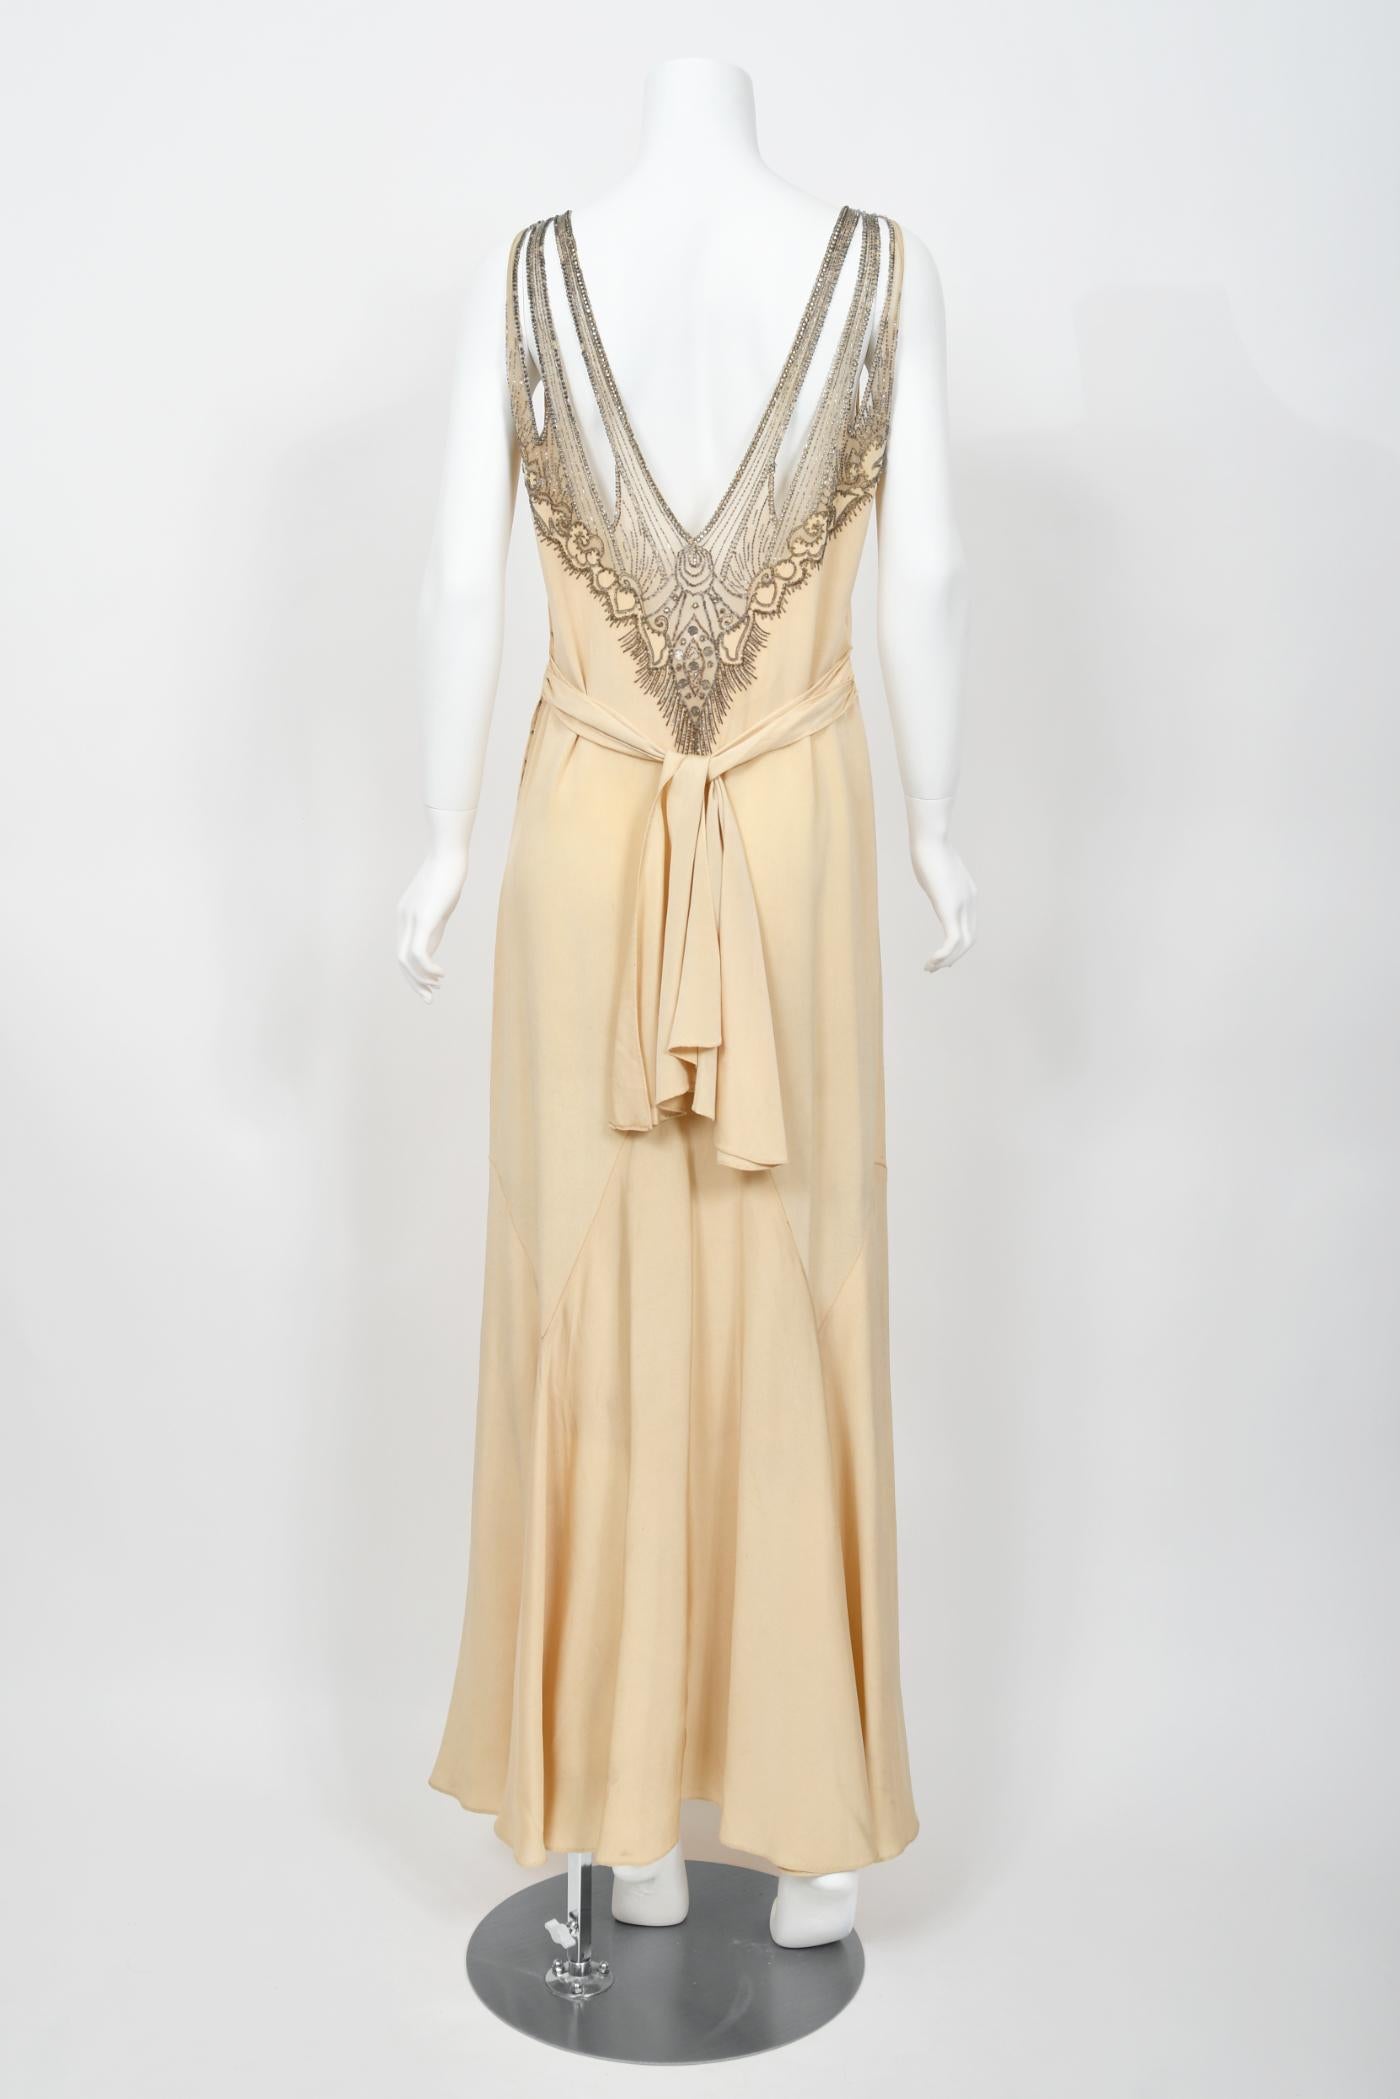 1930's French Ivory Creme Silk Beaded Sheer Illusion Deco Bias-Cut Bridal Gown   For Sale 9